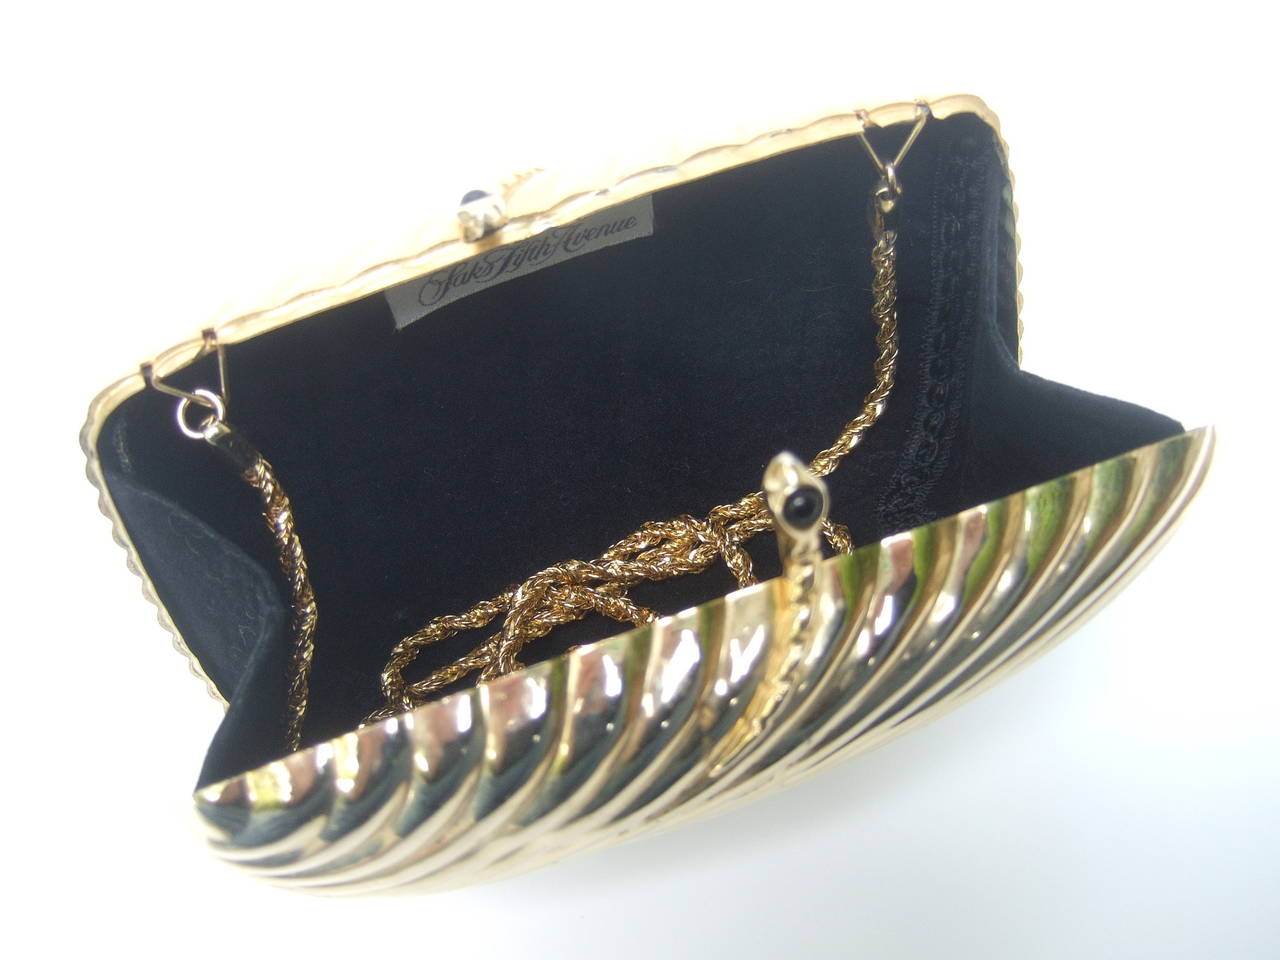 Brown Saks Fifth Avenue Opulent Gilt Metal Serpent Evening Bag Made in Italy